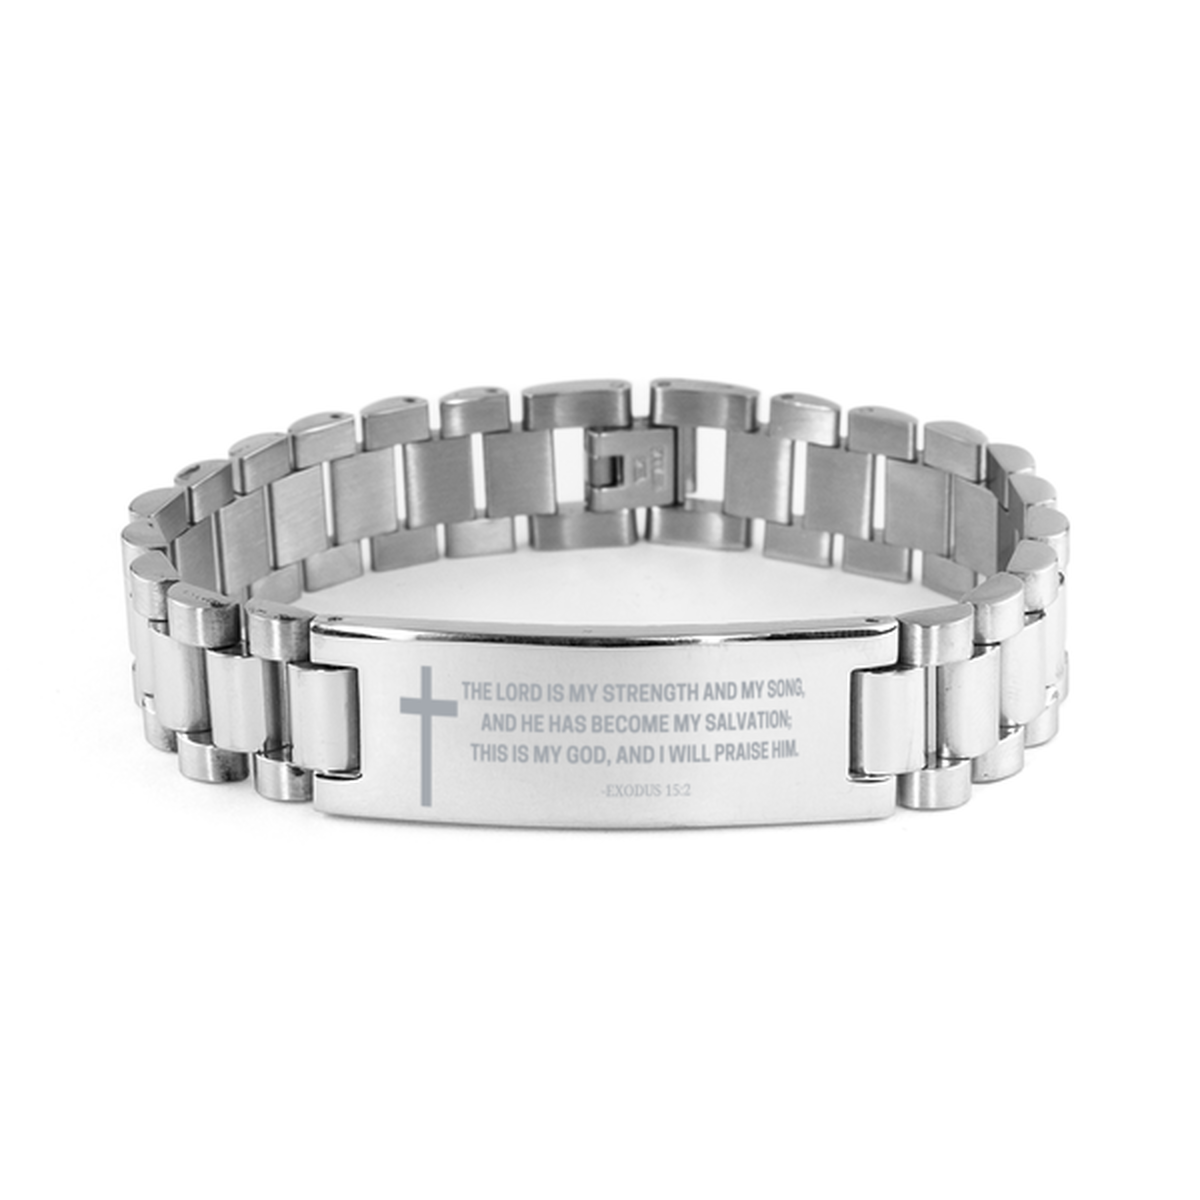 Baptism Gifts For Teenage Boys Girls, Christian Bible Verse Ladder Stainless Steel Bracelet, The Lord is my strength, Catholic Confirmation Gifts for Son, Godson, Grandson, Nephew